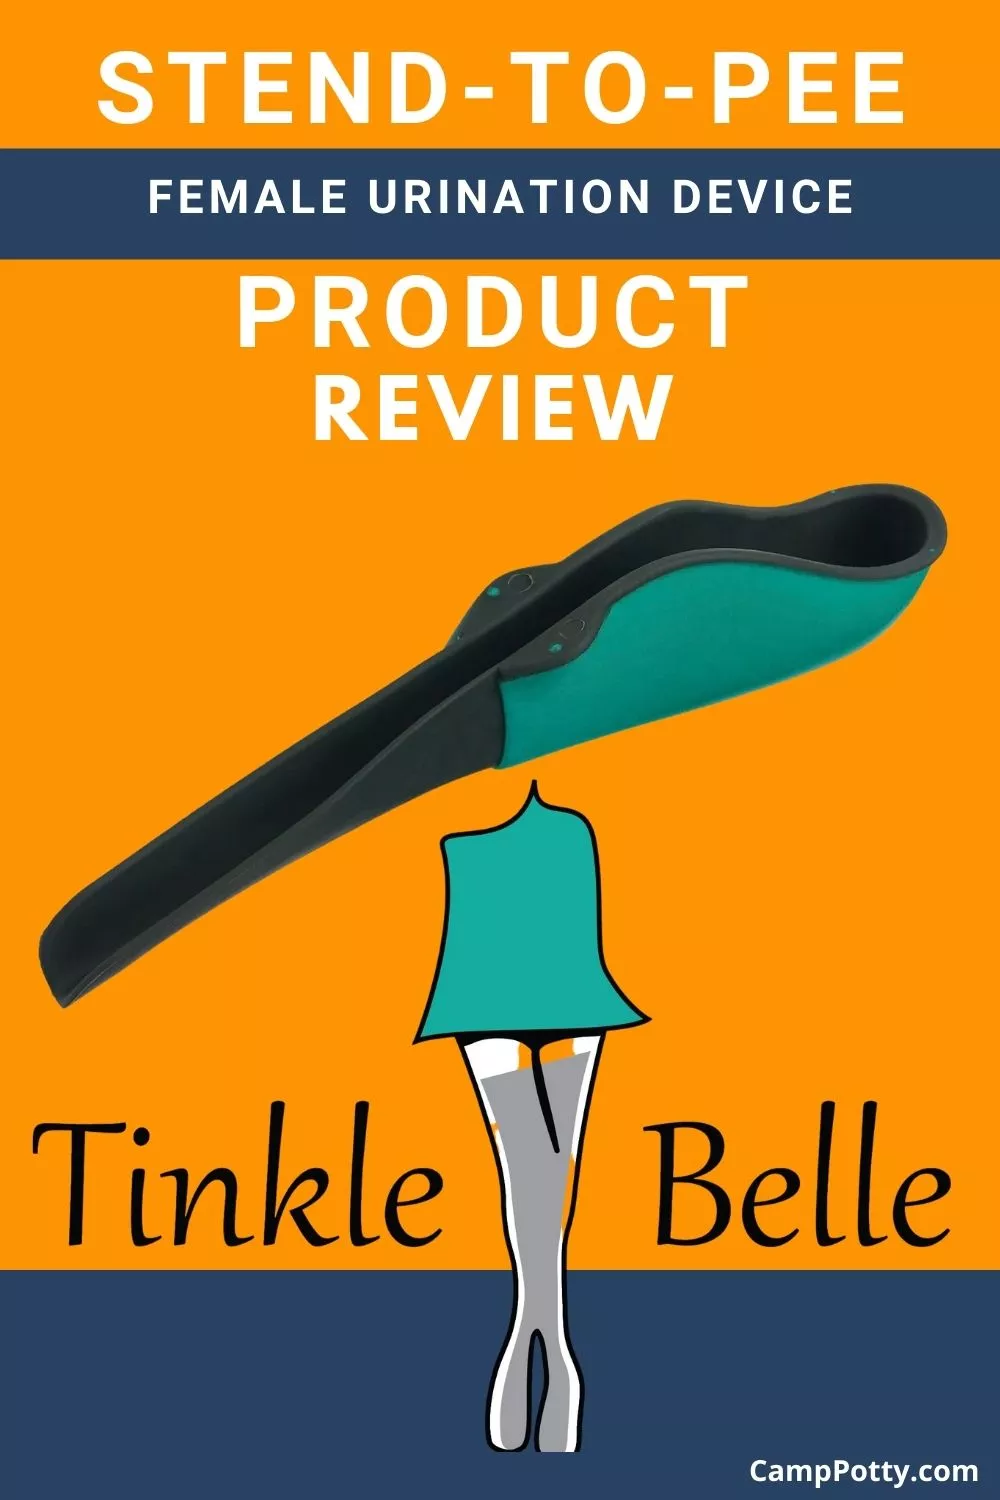 Tinkle Belle Stand to pee Female Urination Device review